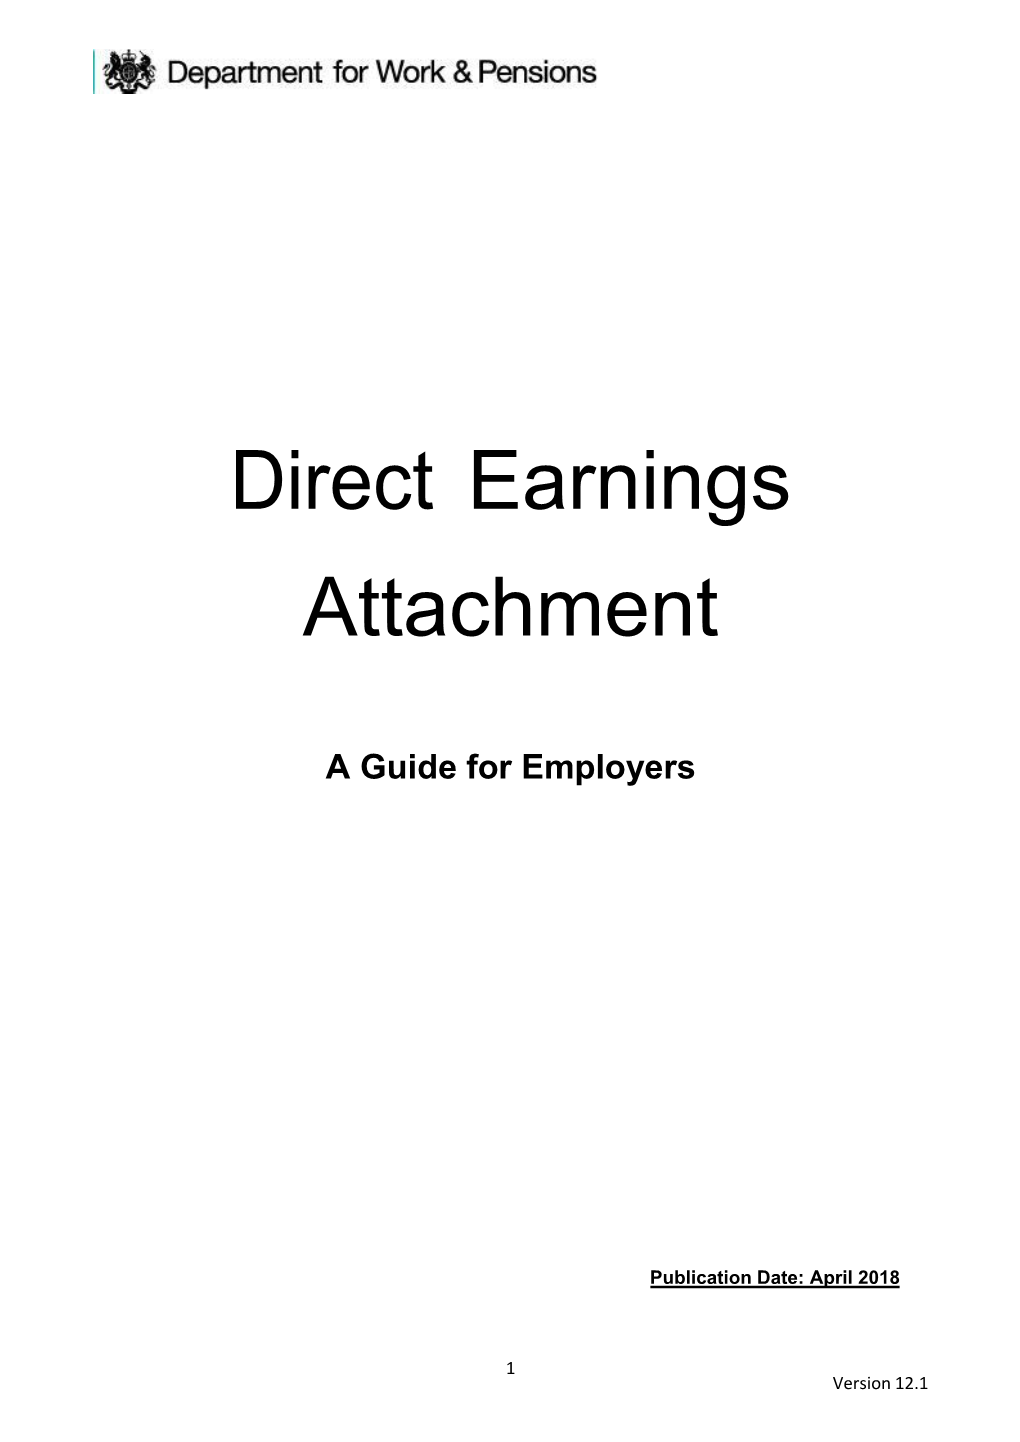 Direct Earnings Attachment